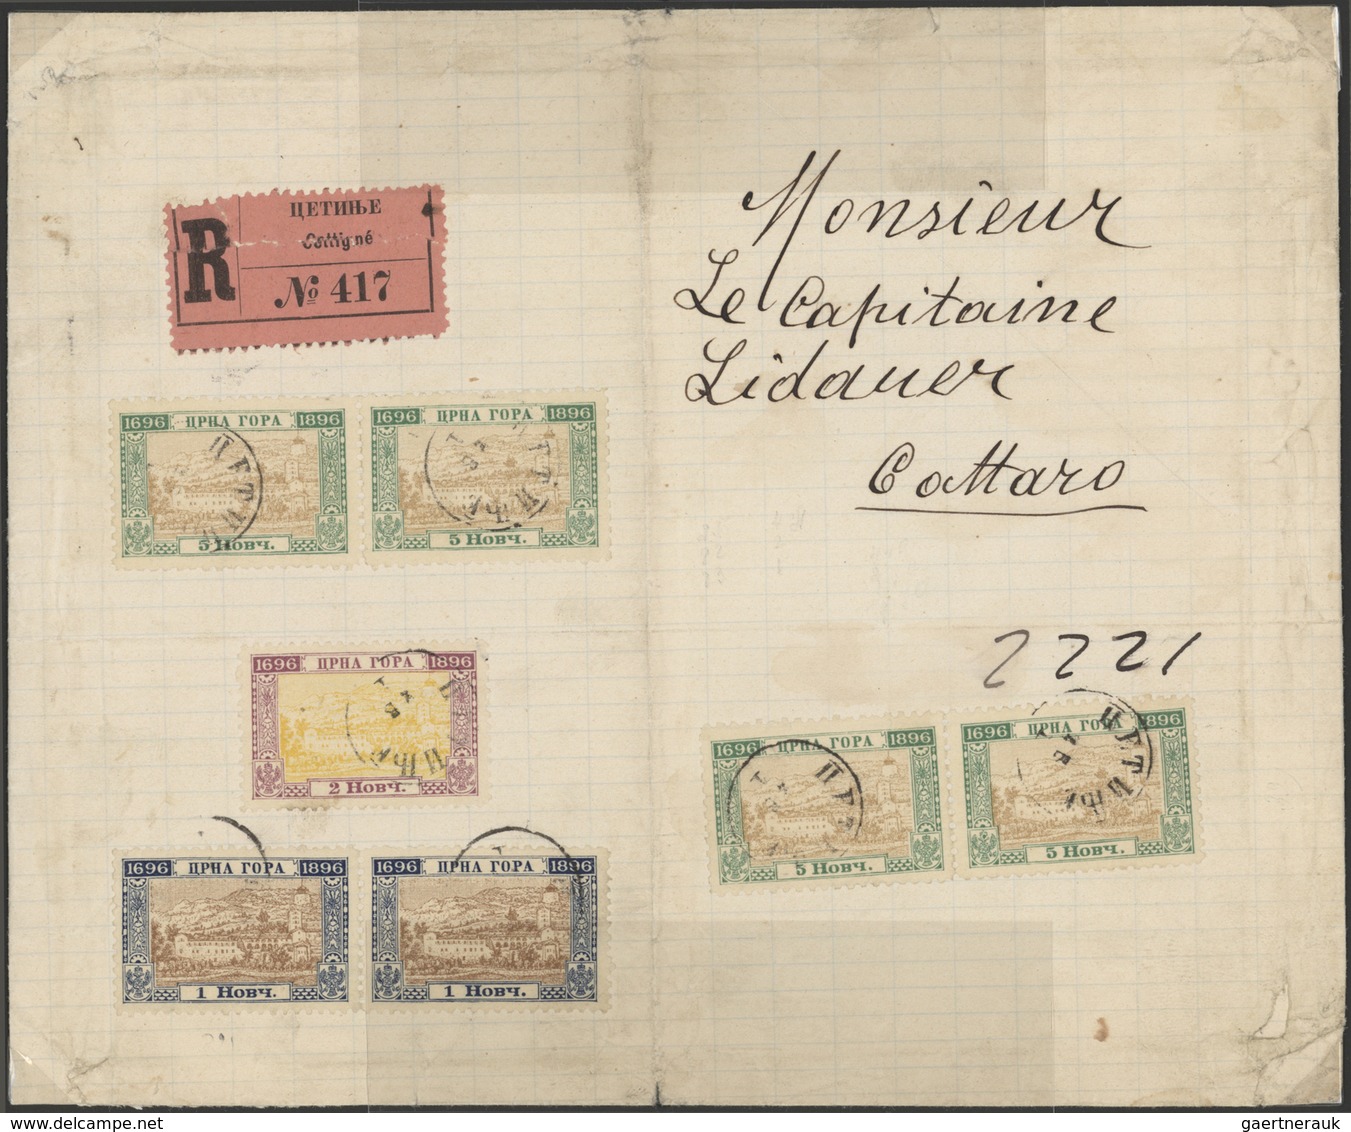 */O/Br/** Montenegro: 1874/1918 + 1941/1945: exhibition collection "Montenegro" in three albums and one sheet